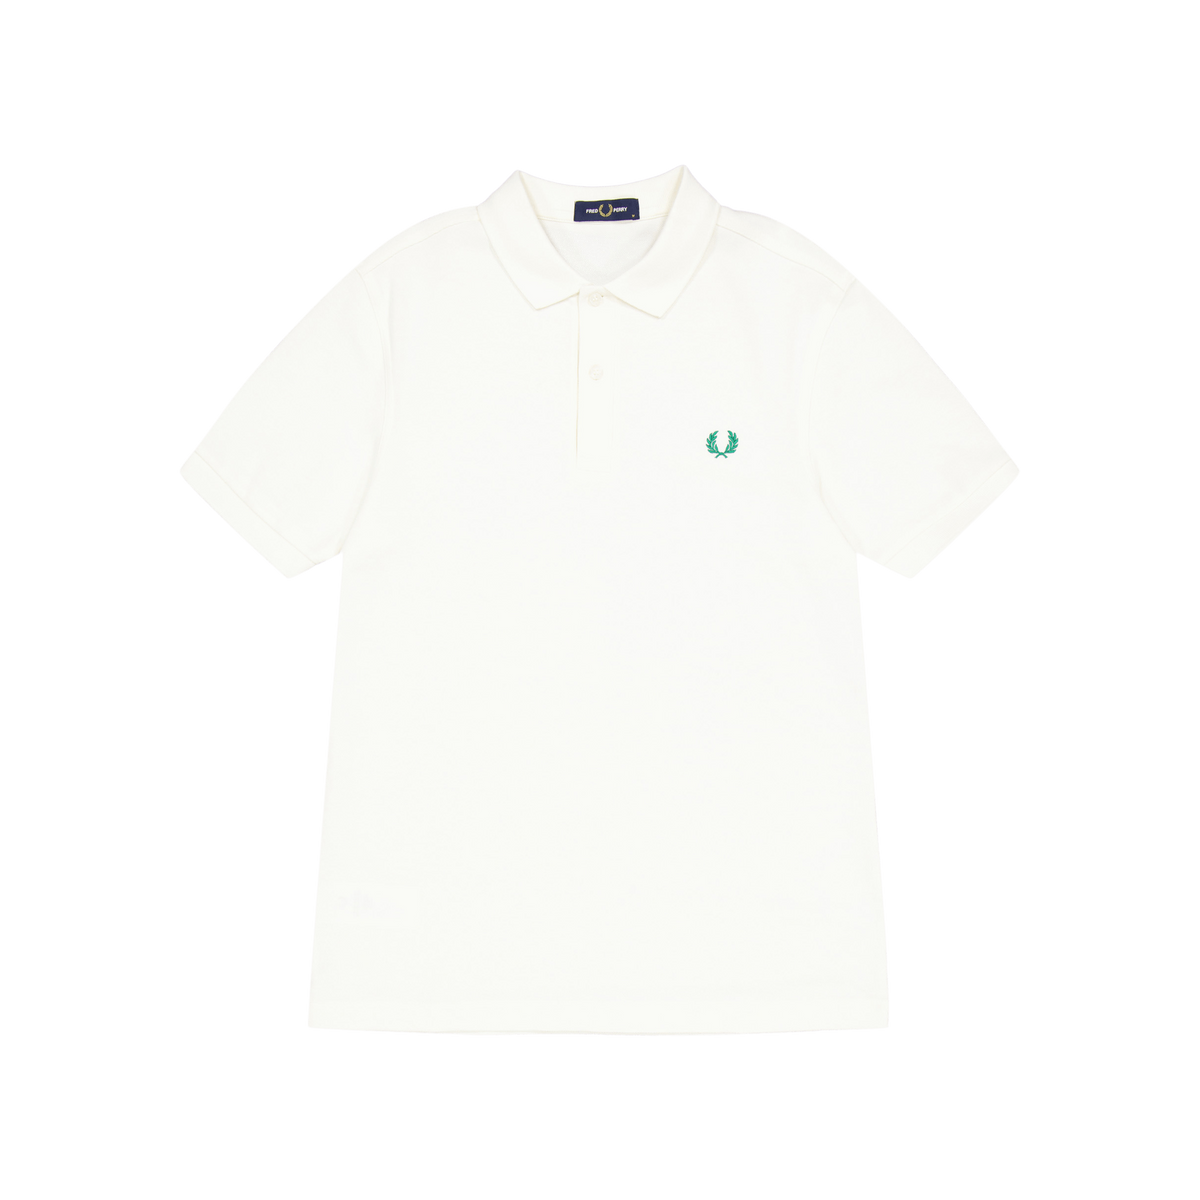 Fred Perry Plain Fred Perry Shirt 760